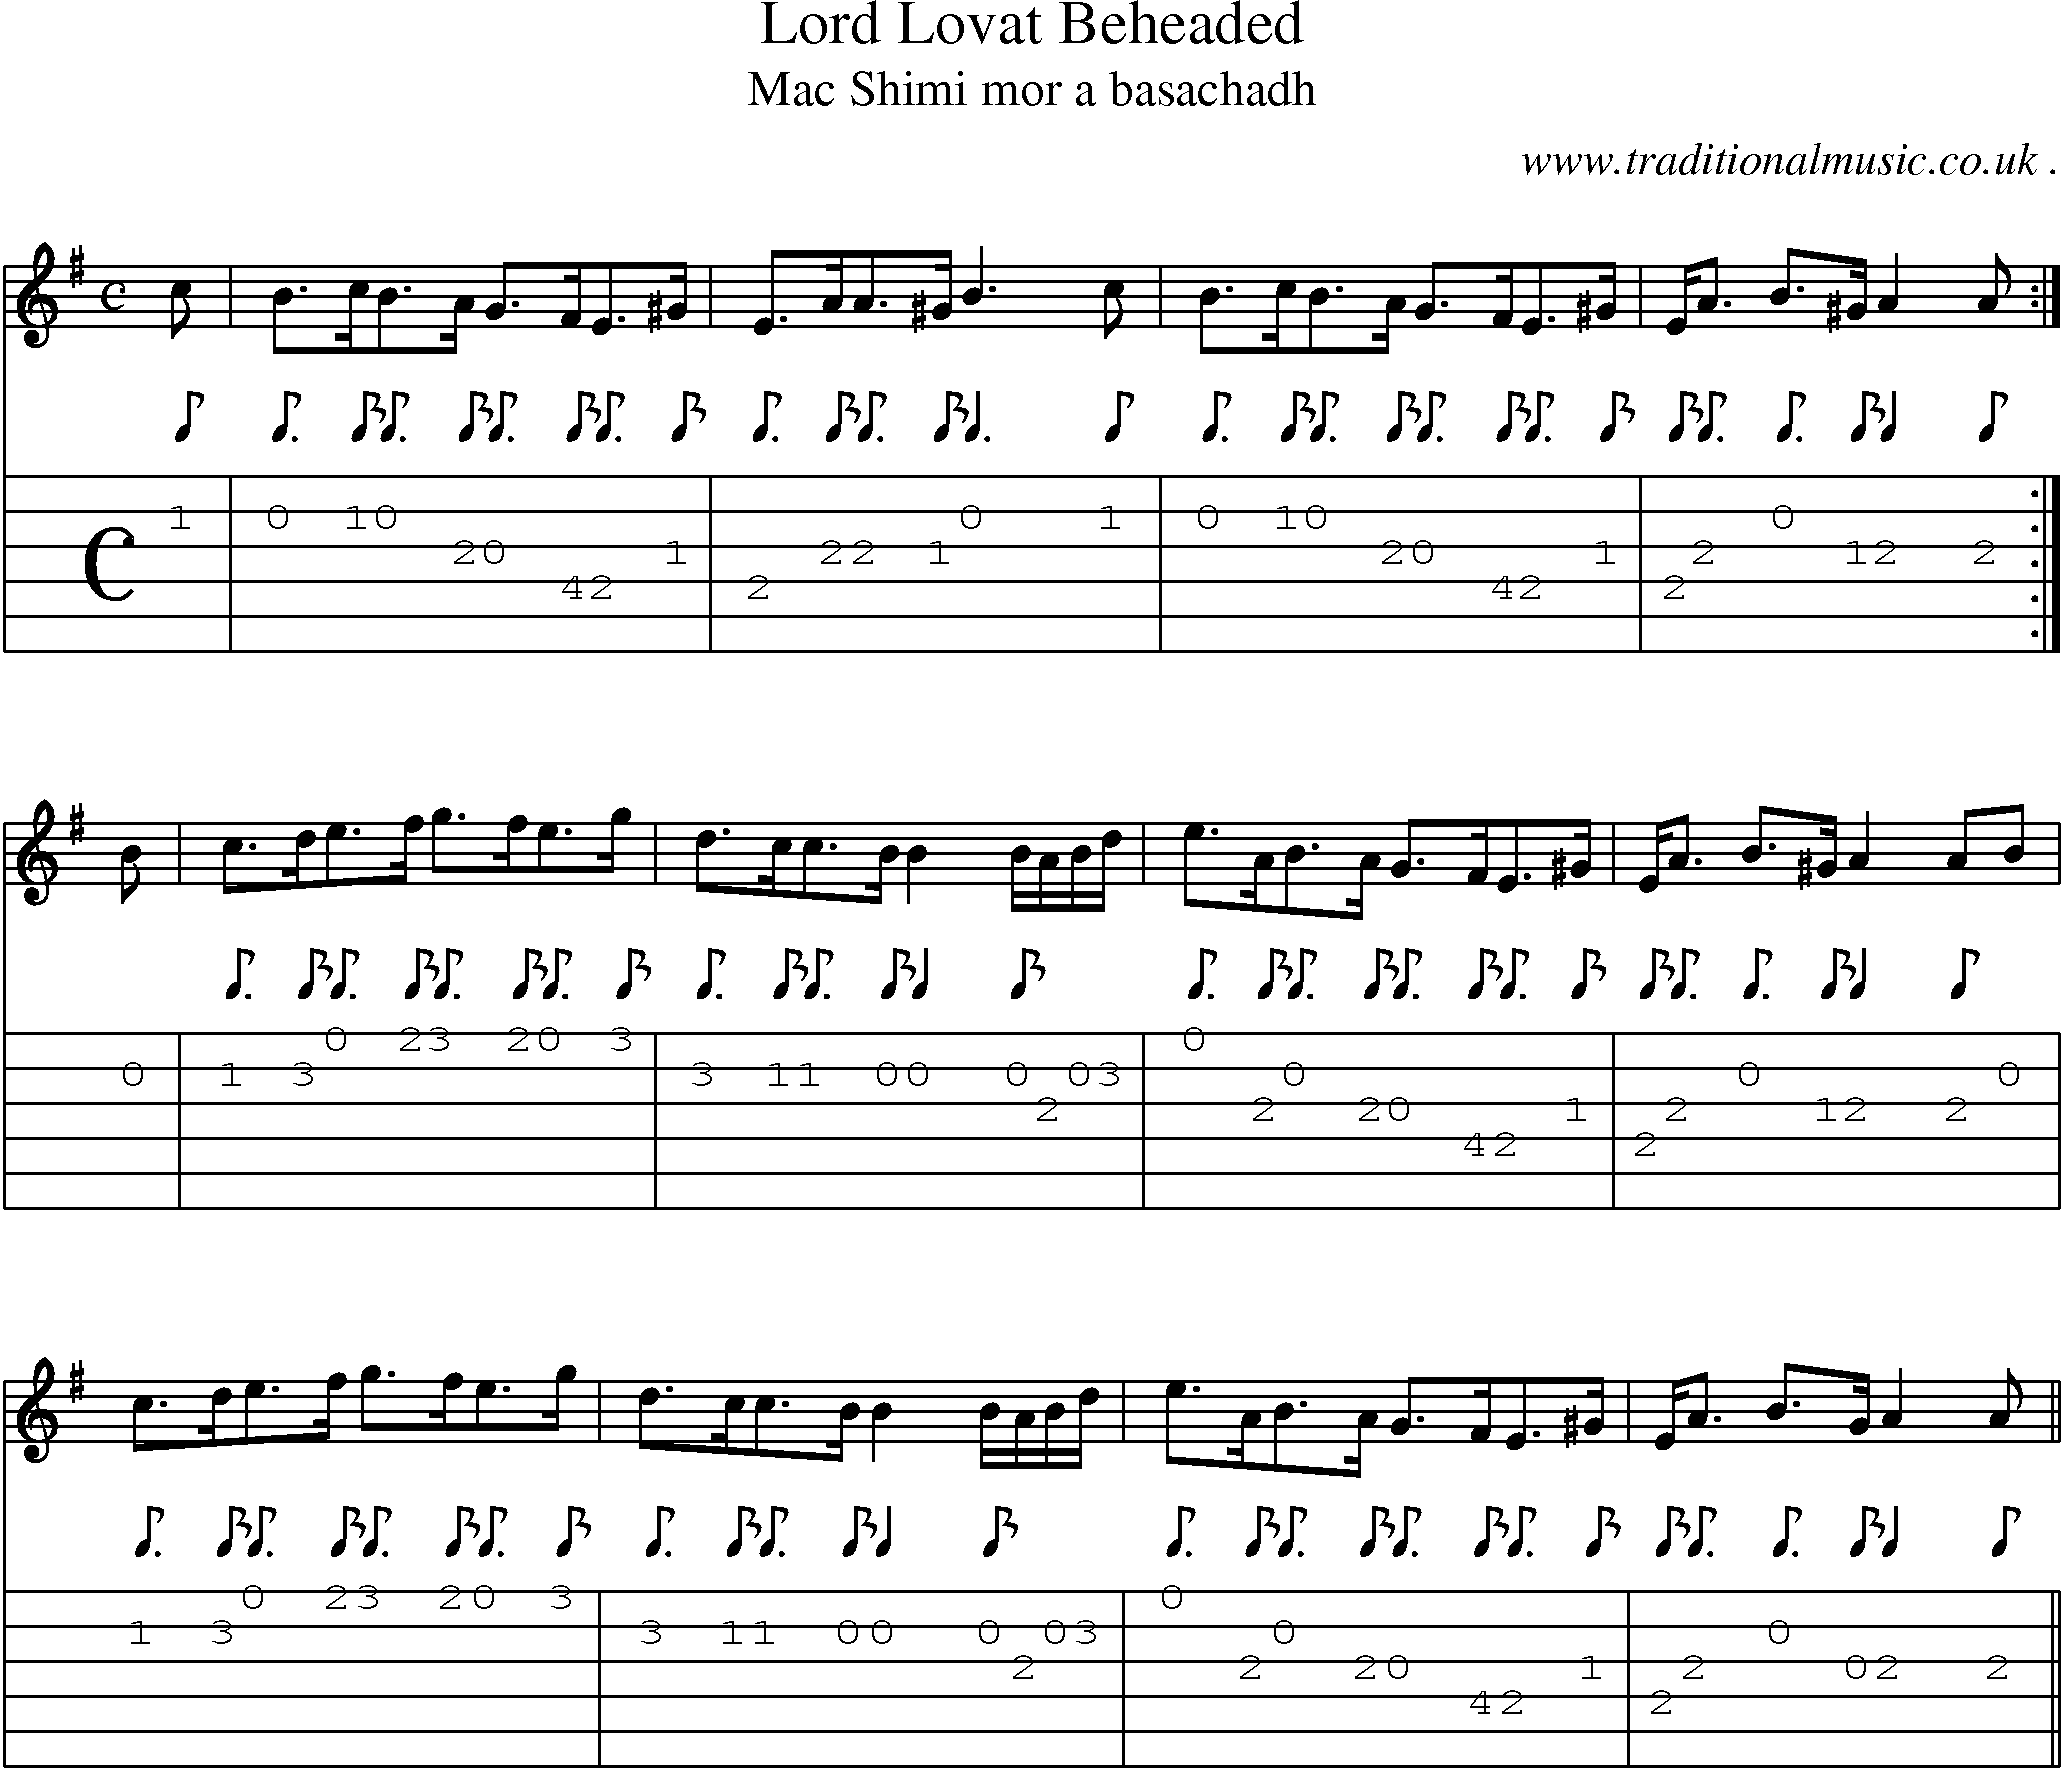 Sheet-music  score, Chords and Guitar Tabs for Lord Lovat Beheaded